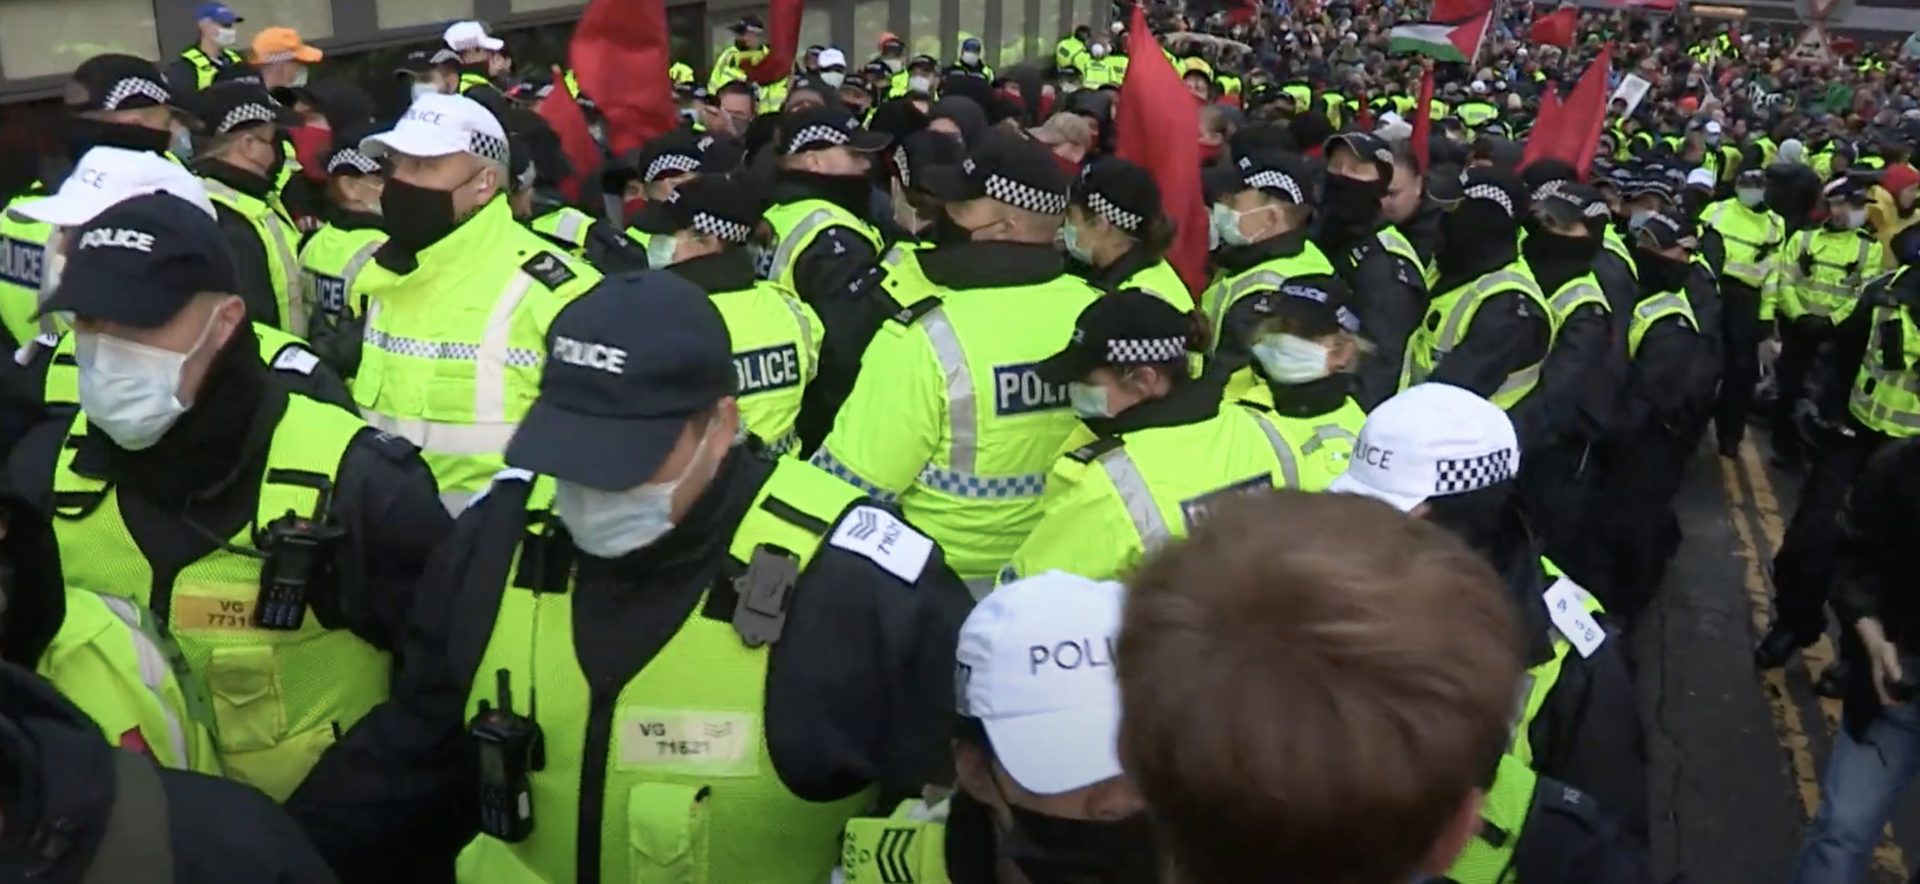 Police Scotland 'lied' about its policing of two protests during COP26, according to new report 2